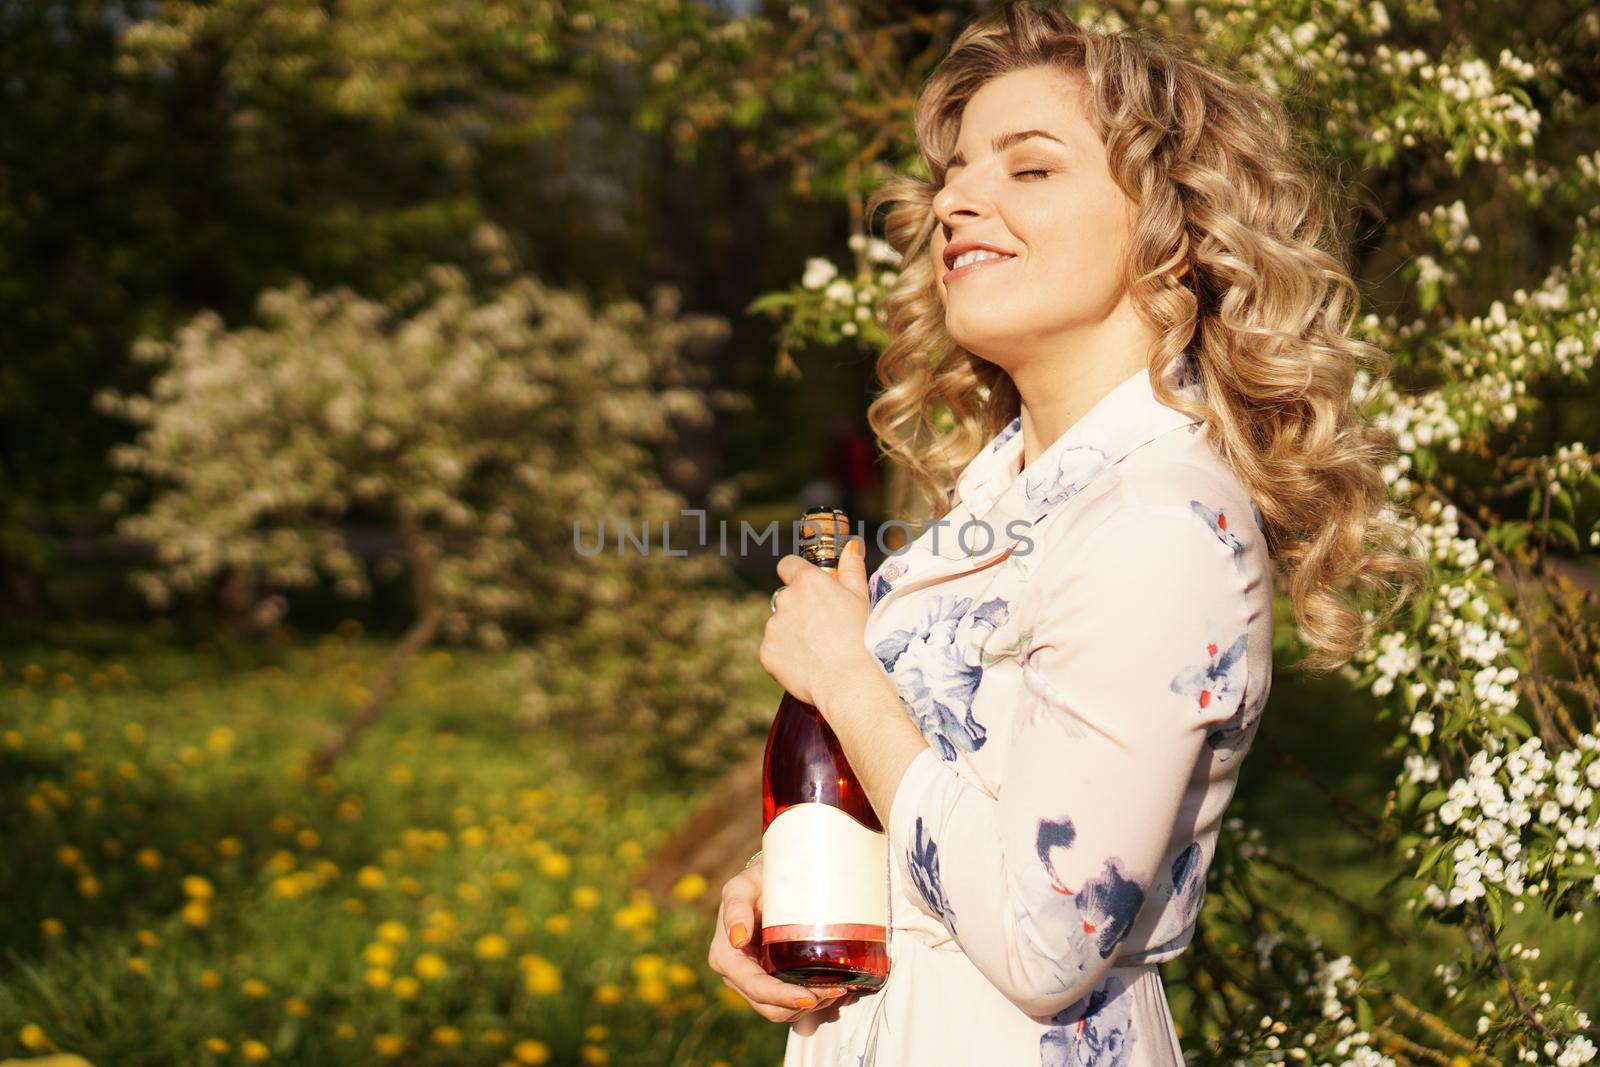 Beautiful young woman holding a blank bottle of wine while having lunch outdoors. Picnic in the park with green grass